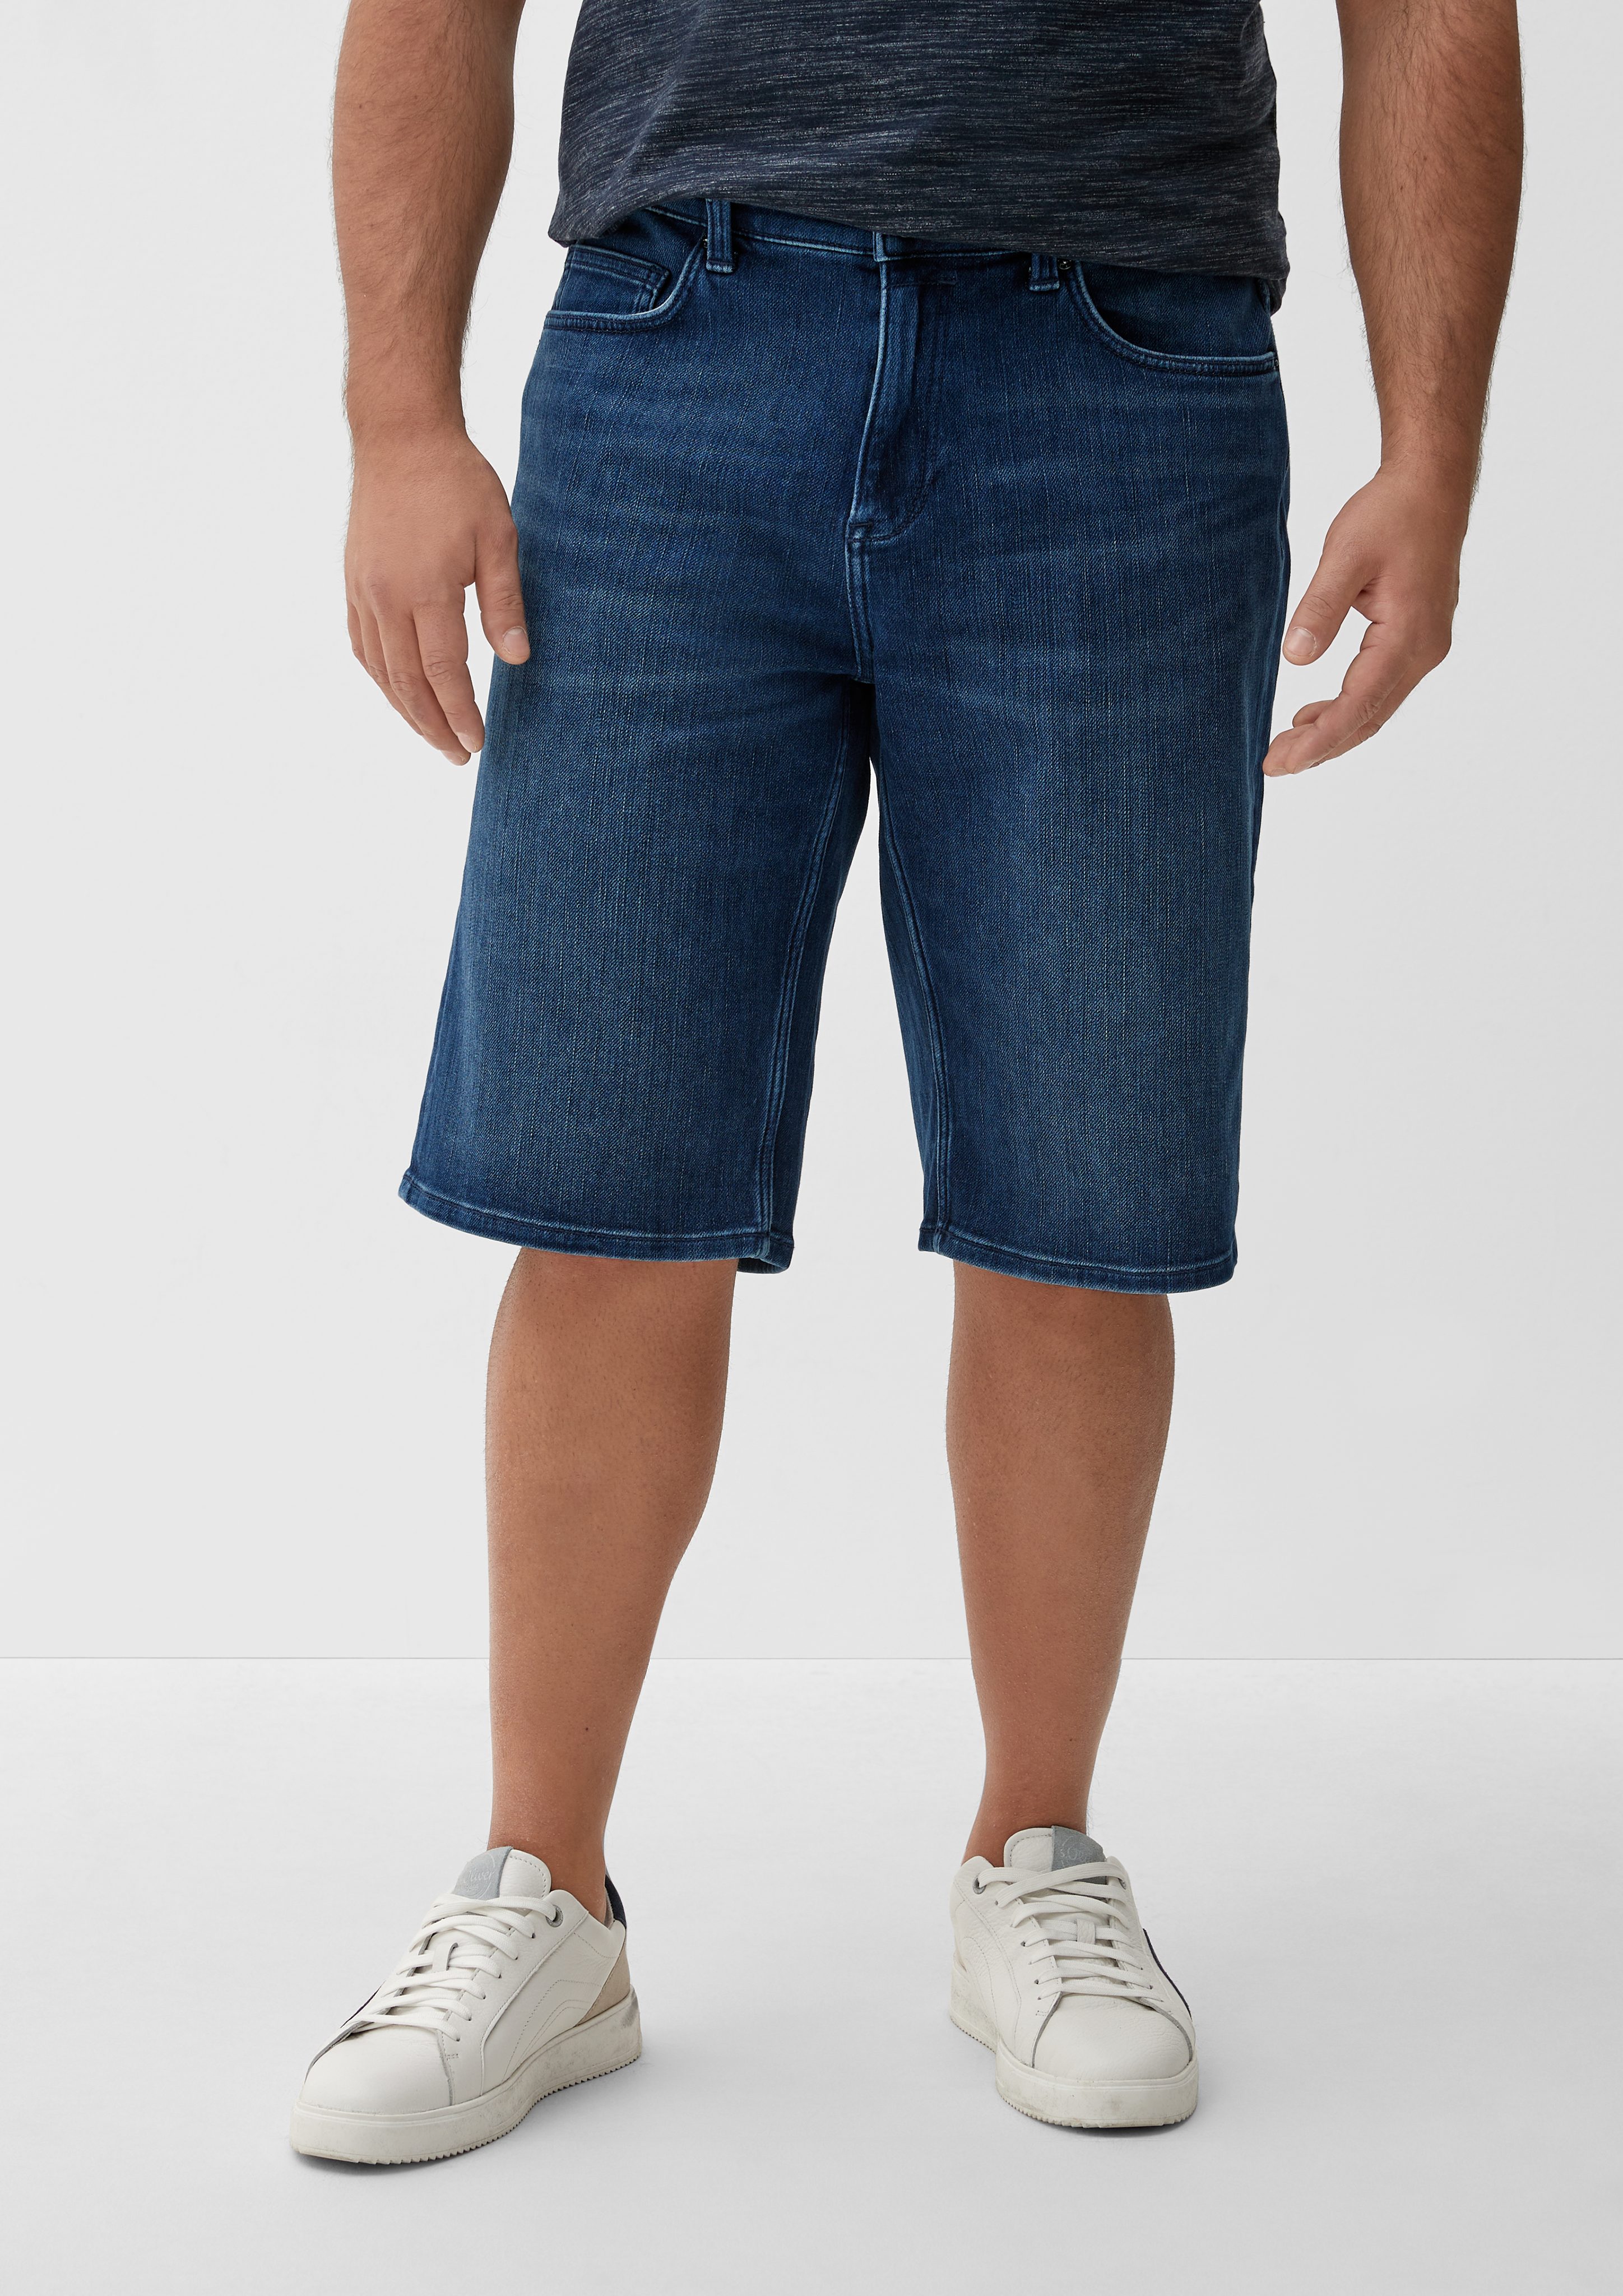 tiefblau Mid Jeansshorts Casby Relaxed Rise Straight / / / Jeans-Shorts Leg s.Oliver Fit